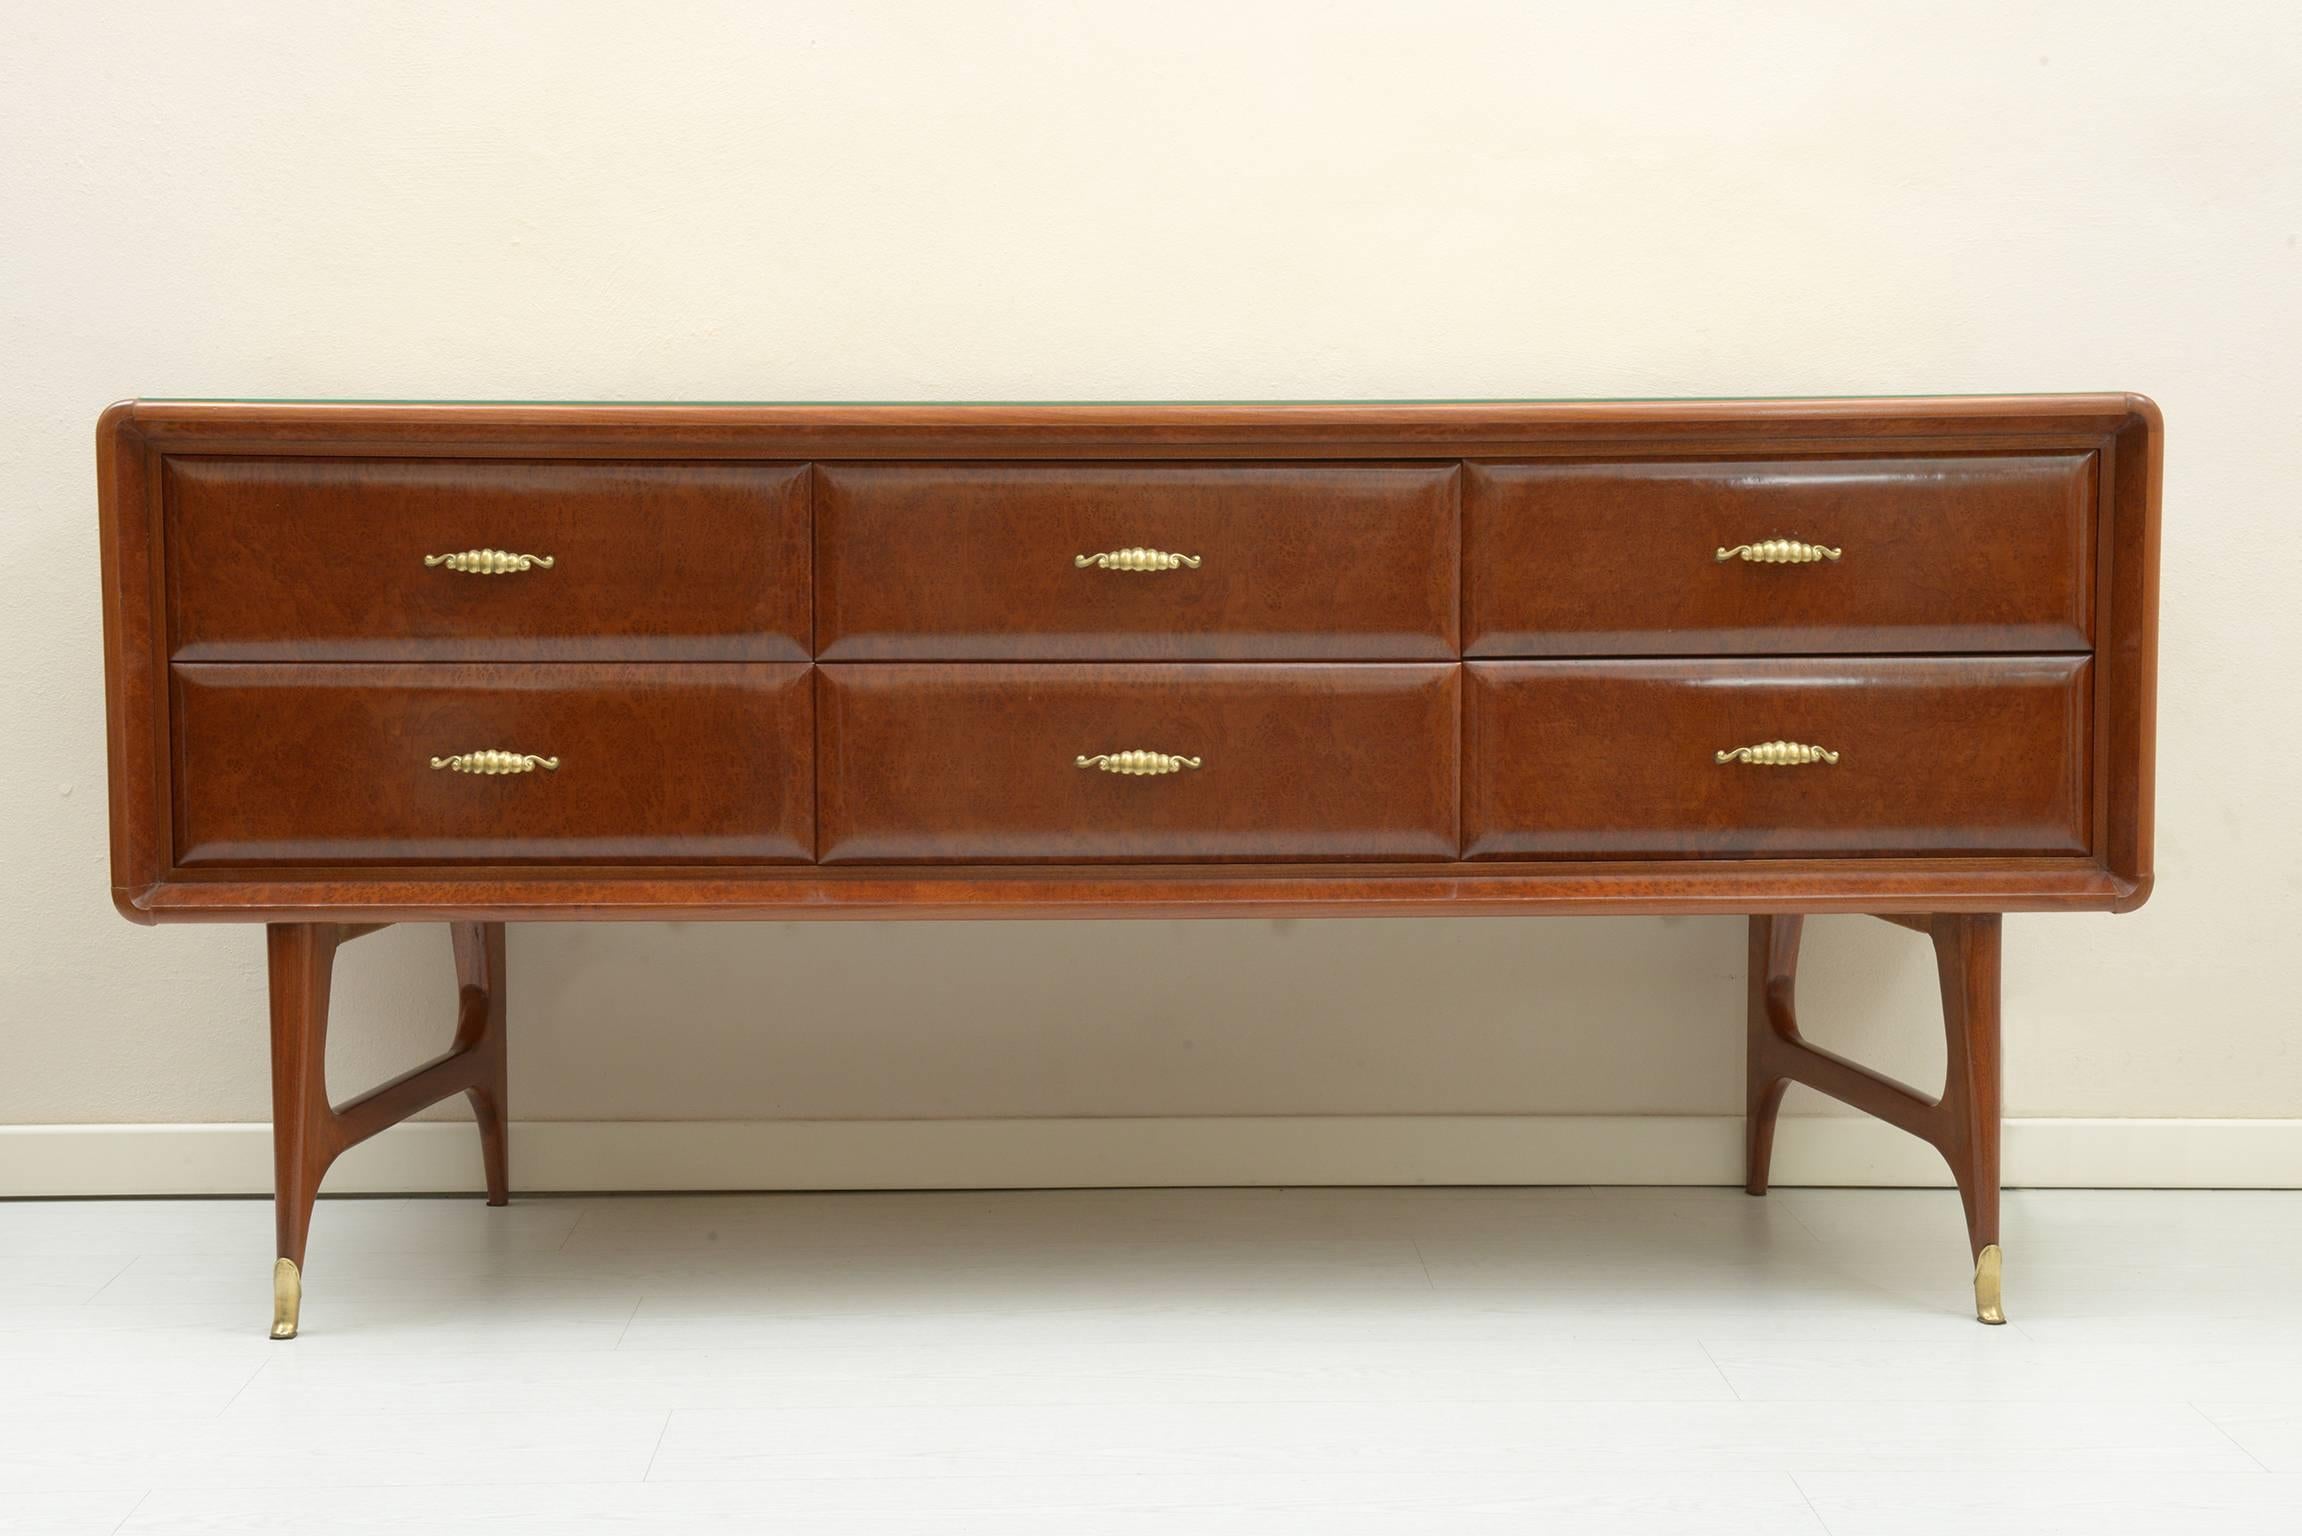 Six front rounded drawers midcentury Italian 1950s chest of drawers on Thuja Burl, cust brass feet and handles.
The lateral support legs are uprights that tilt, squeezing behind towards the central part.
The top glass is gold leaf decorated from